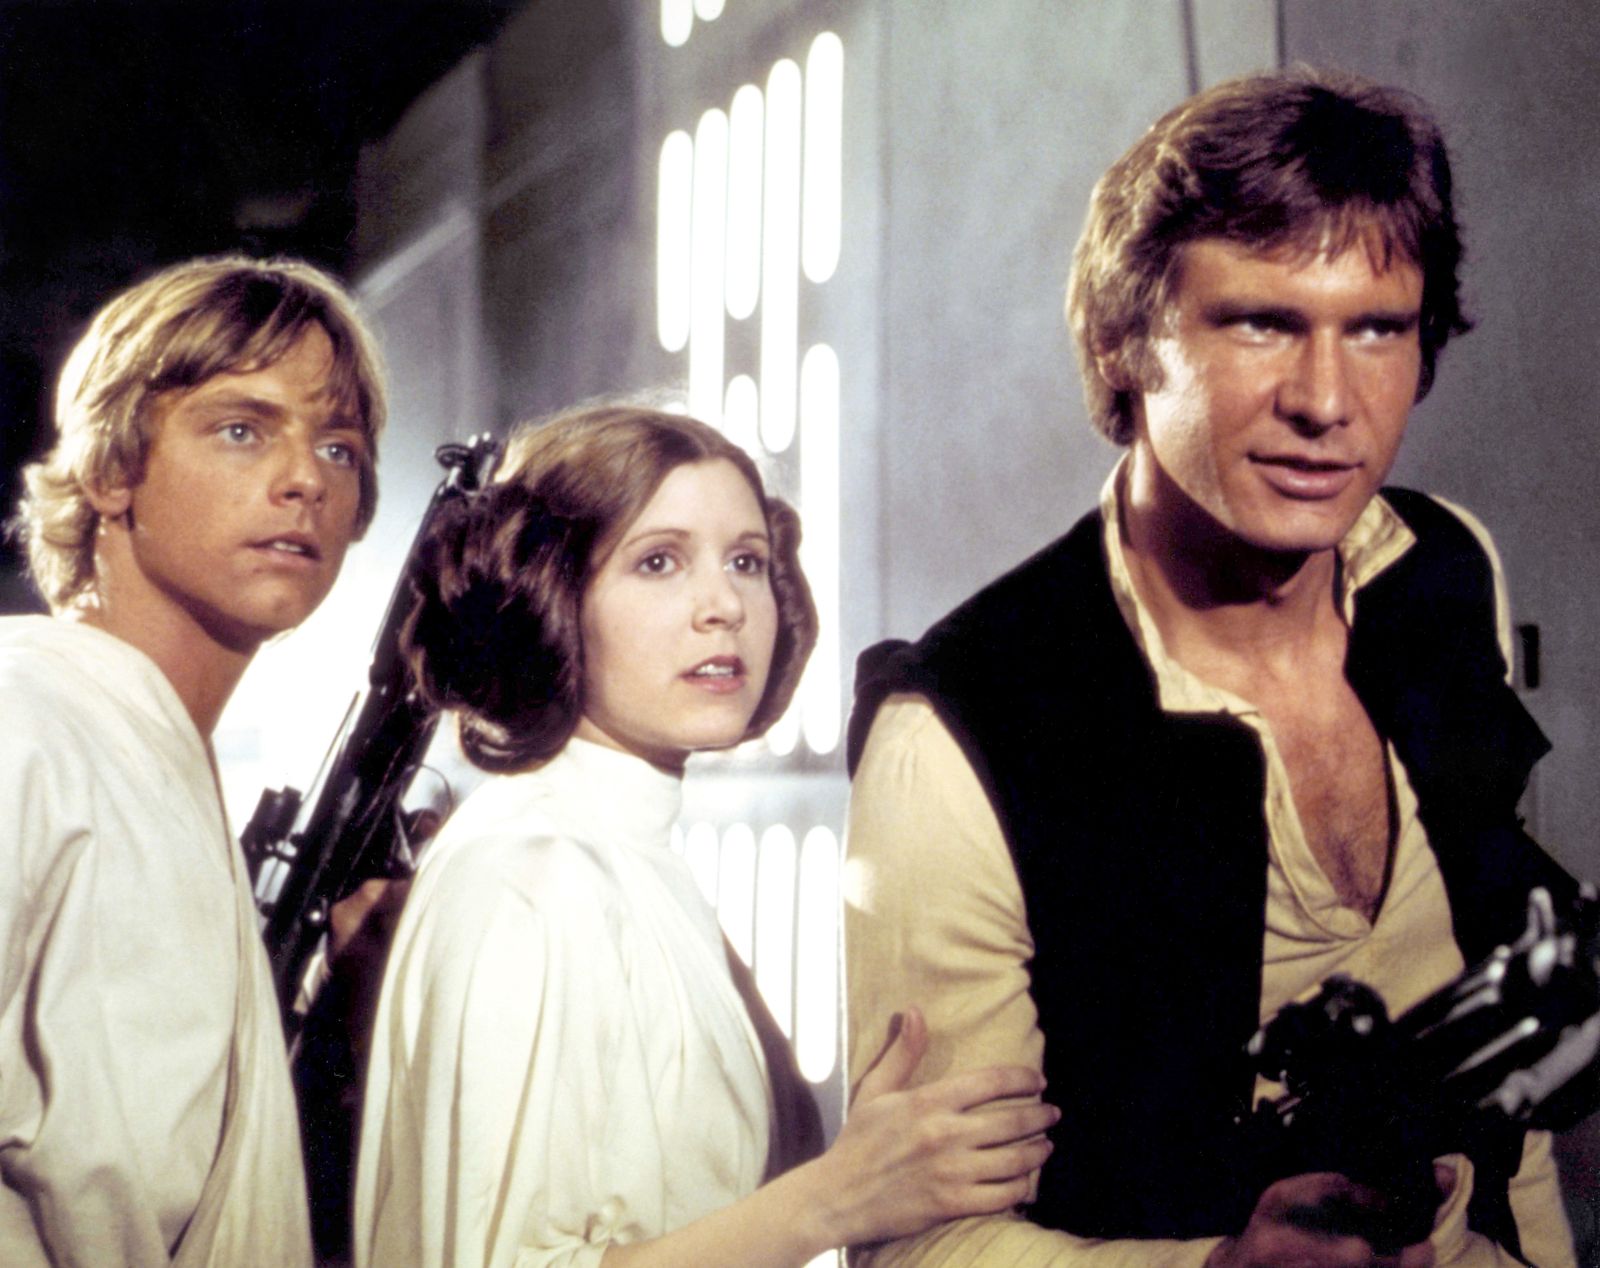 Harrison Ford Forgot This 'Star Wars' Script in an Apartment He Rented During Filming